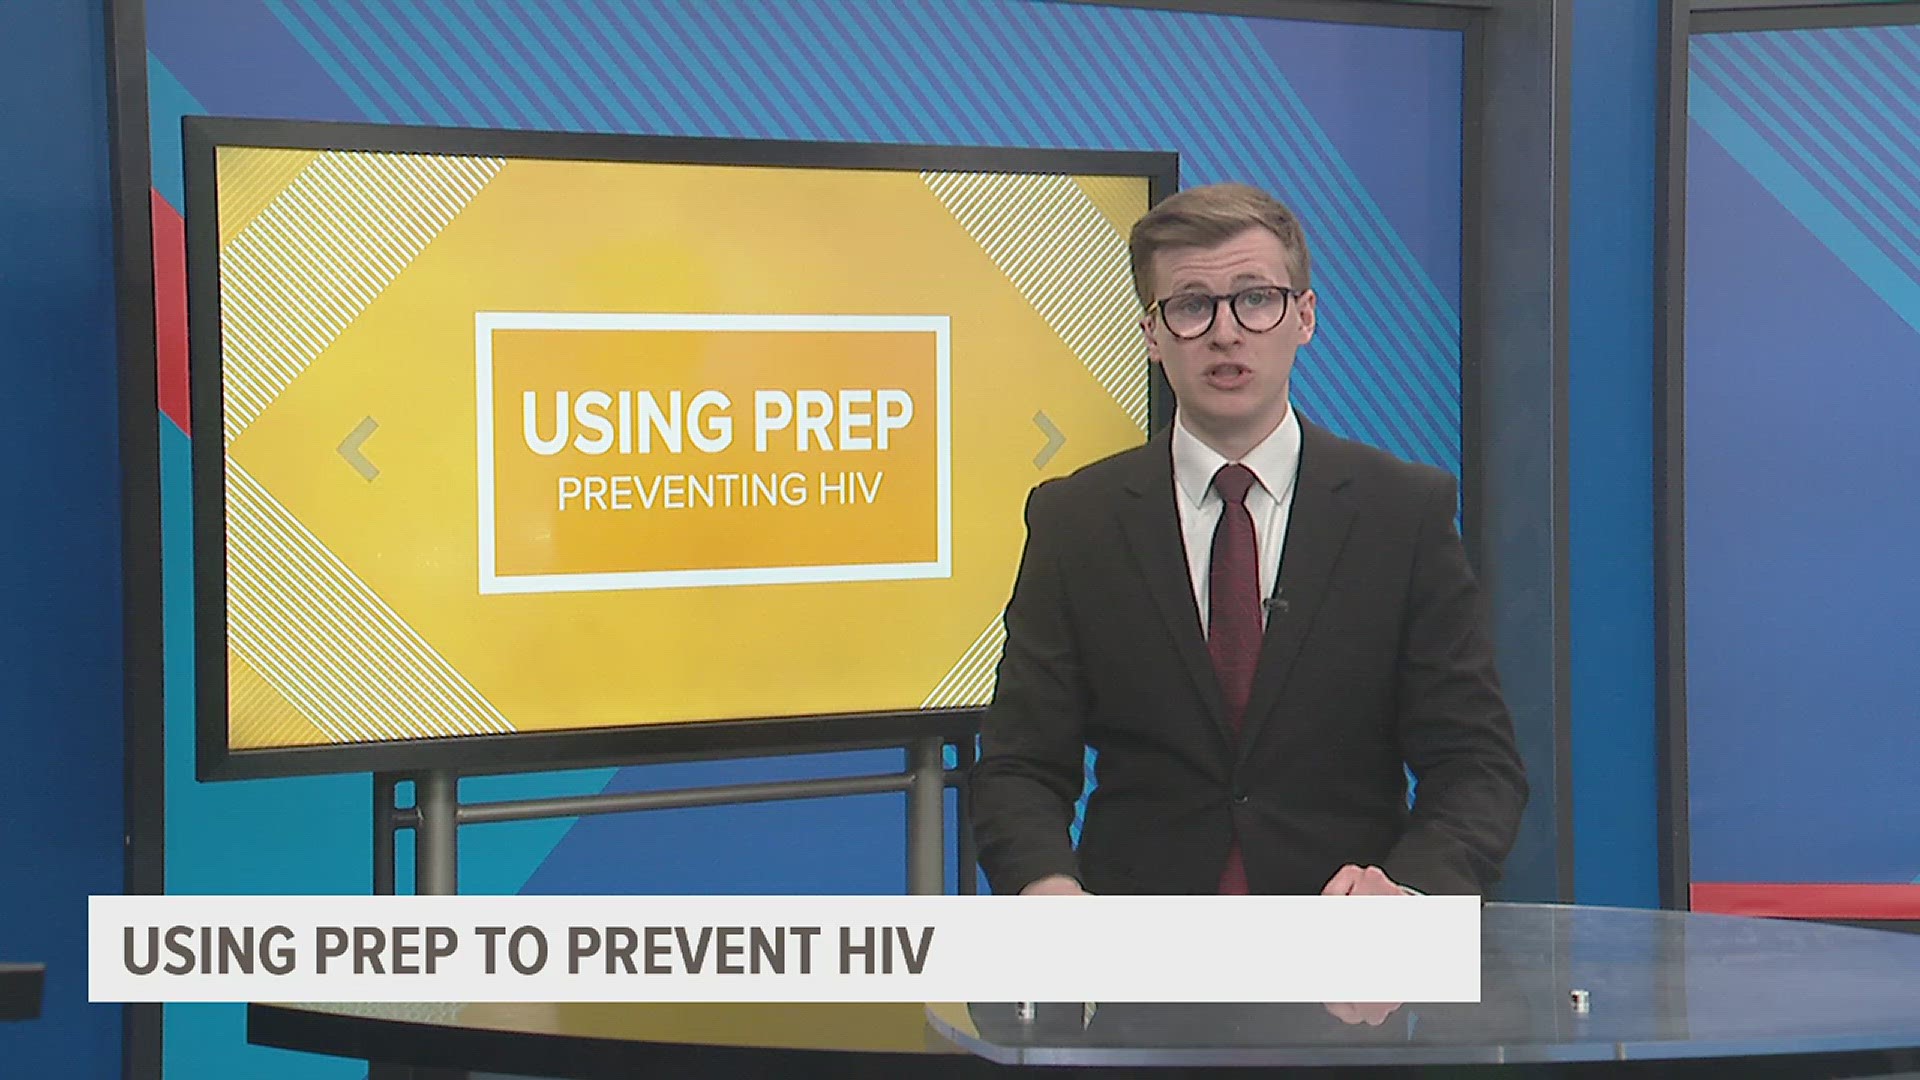 The Project of the Quad Cities has seen an uptick in the use of PrEP (Pre-exposure prohylaxis), an HIV prevention drug, but only in white, gay and bisexual men.